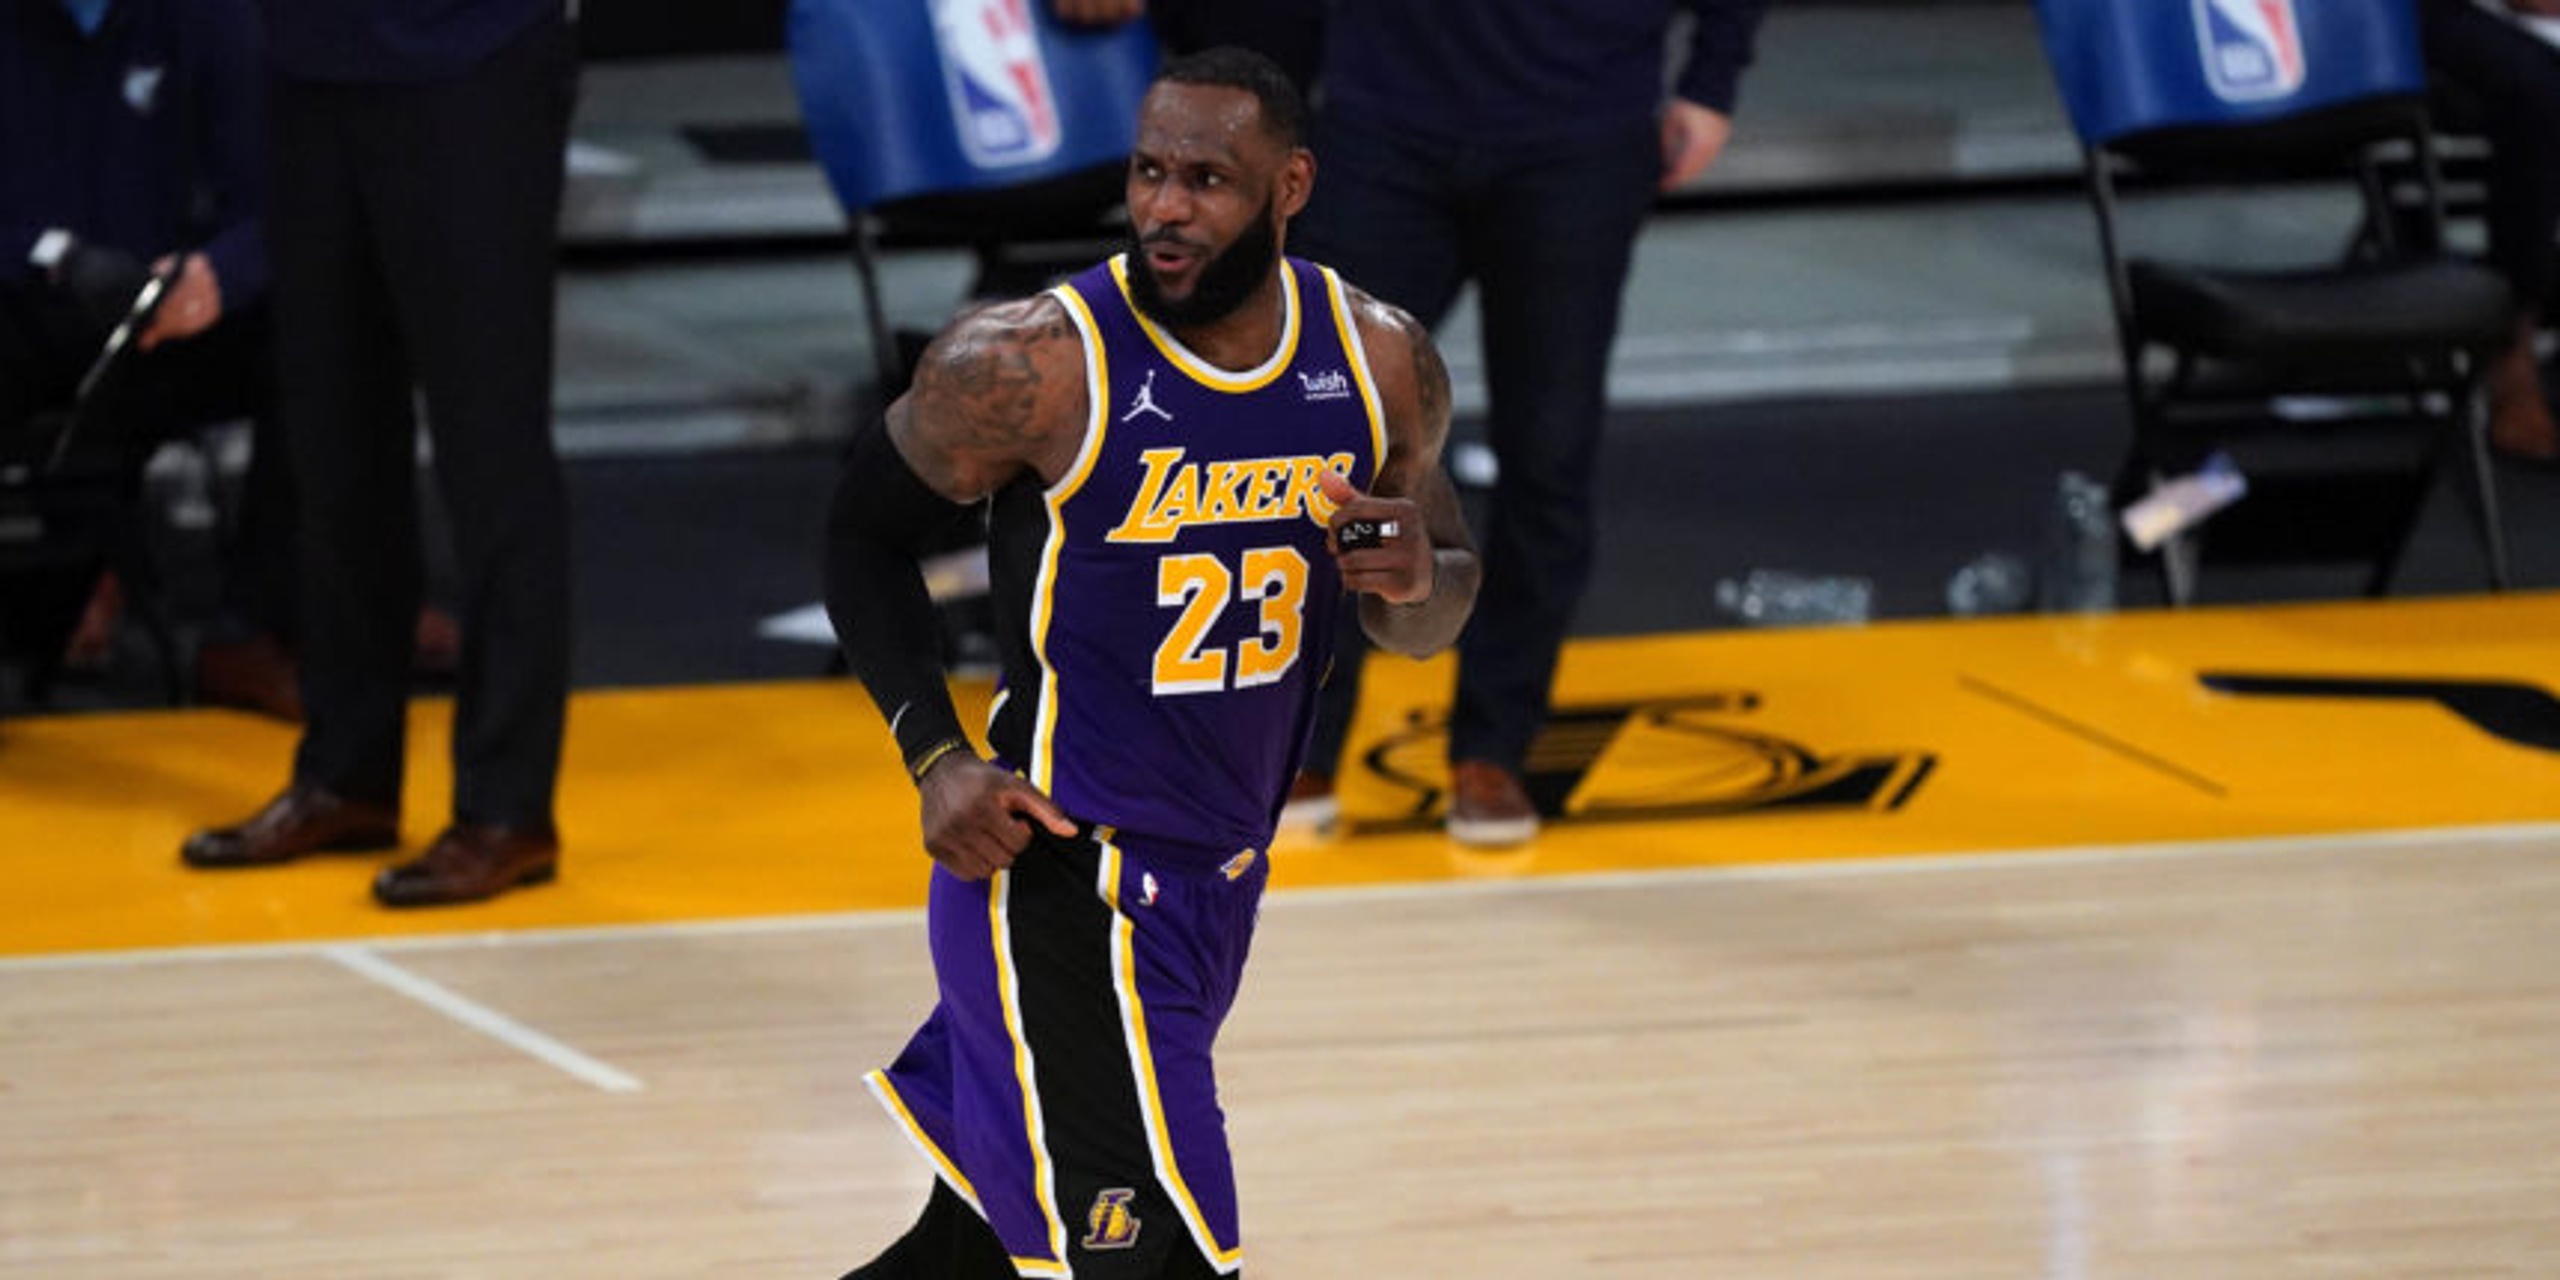 A year after Finals, Lakers and Heat set to play before fans